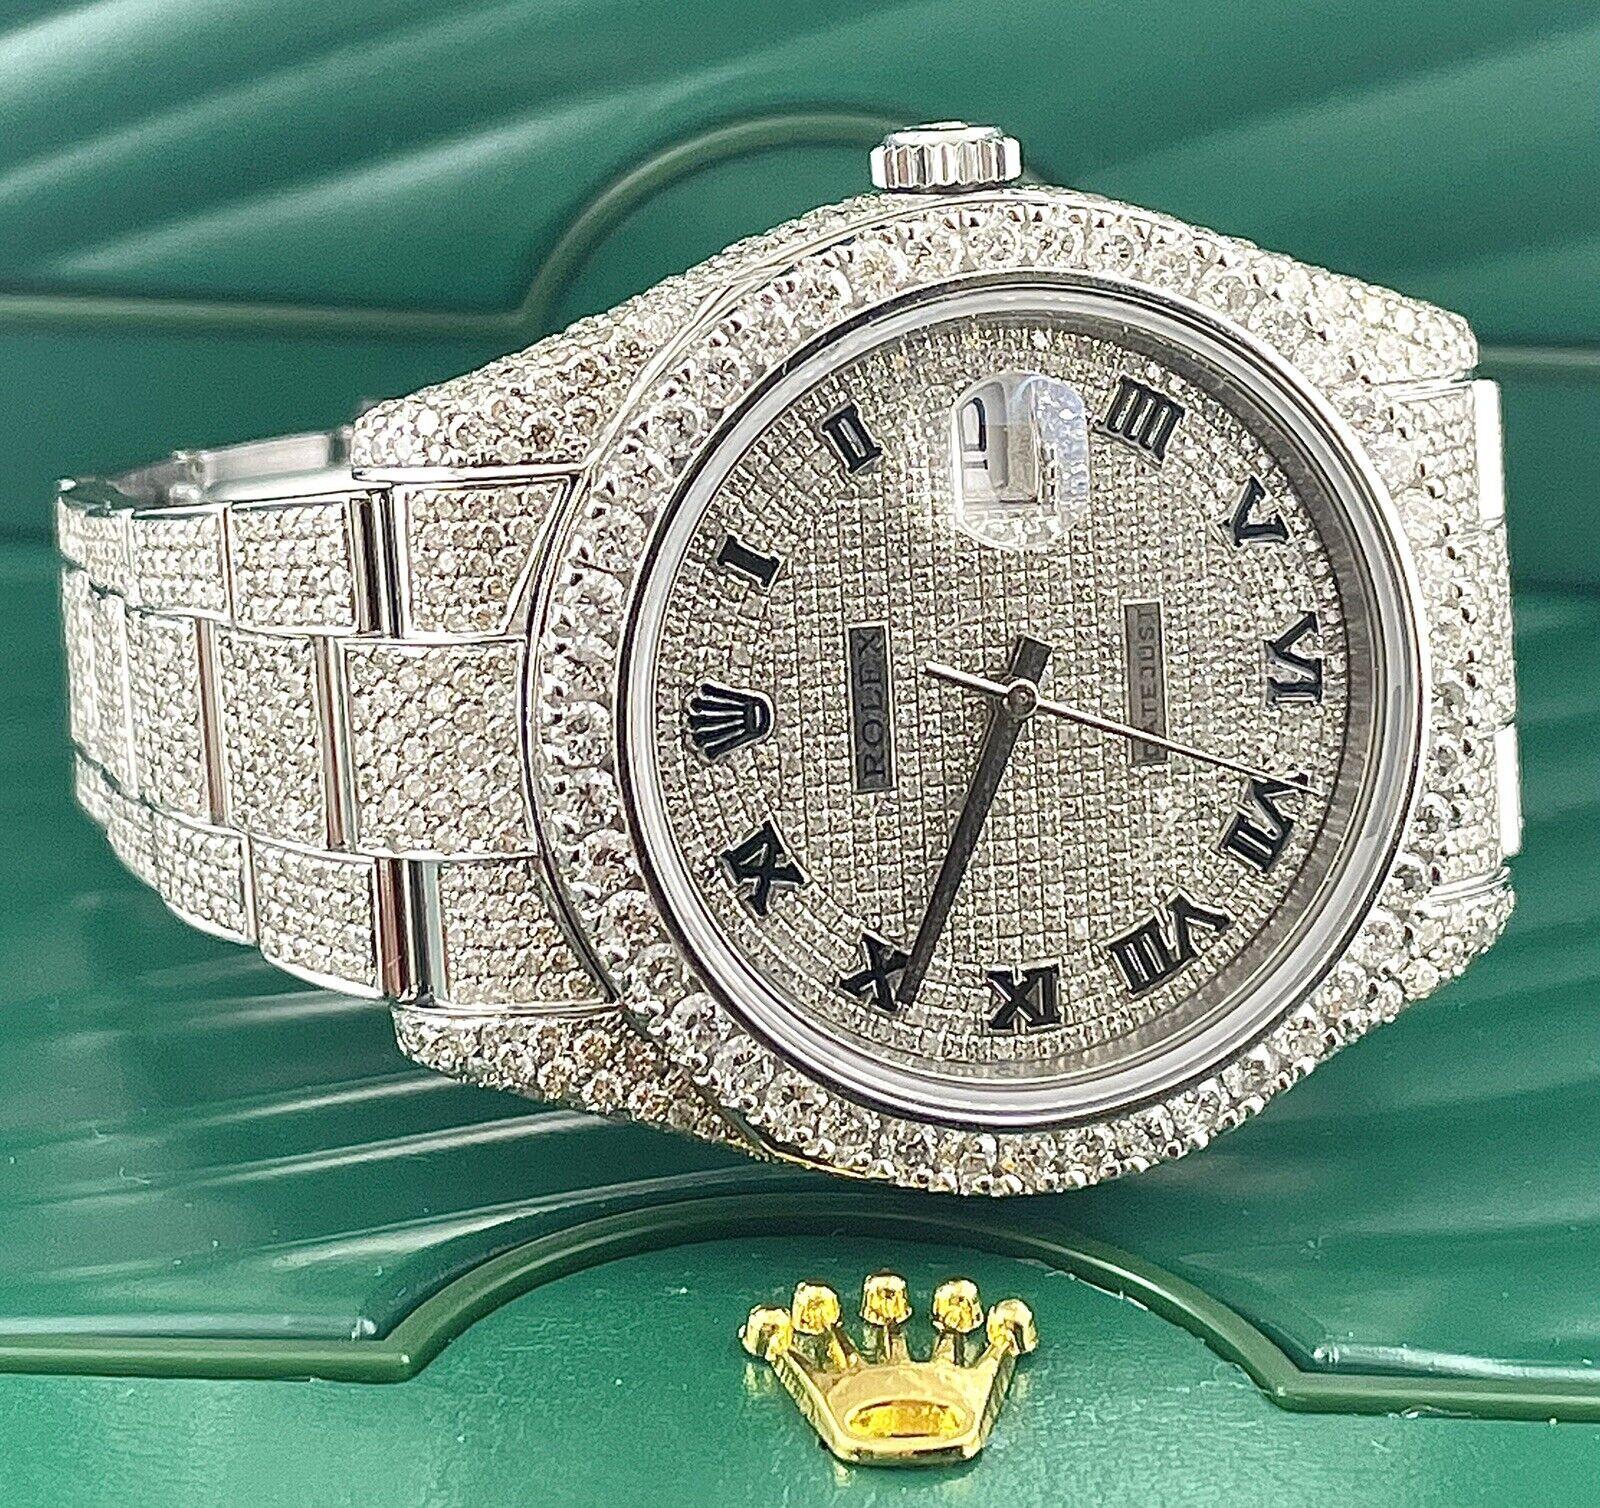 Rolex Datejust II 41mm Watch. A Pre-owned watch w/ Gift Box. Watch is 100% Authentic and Comes with Authenticity Card. Watch Reference is 116300 and is in Excellent Condition (See Pictures). The dial color is Silver and material is Stainless Steel.